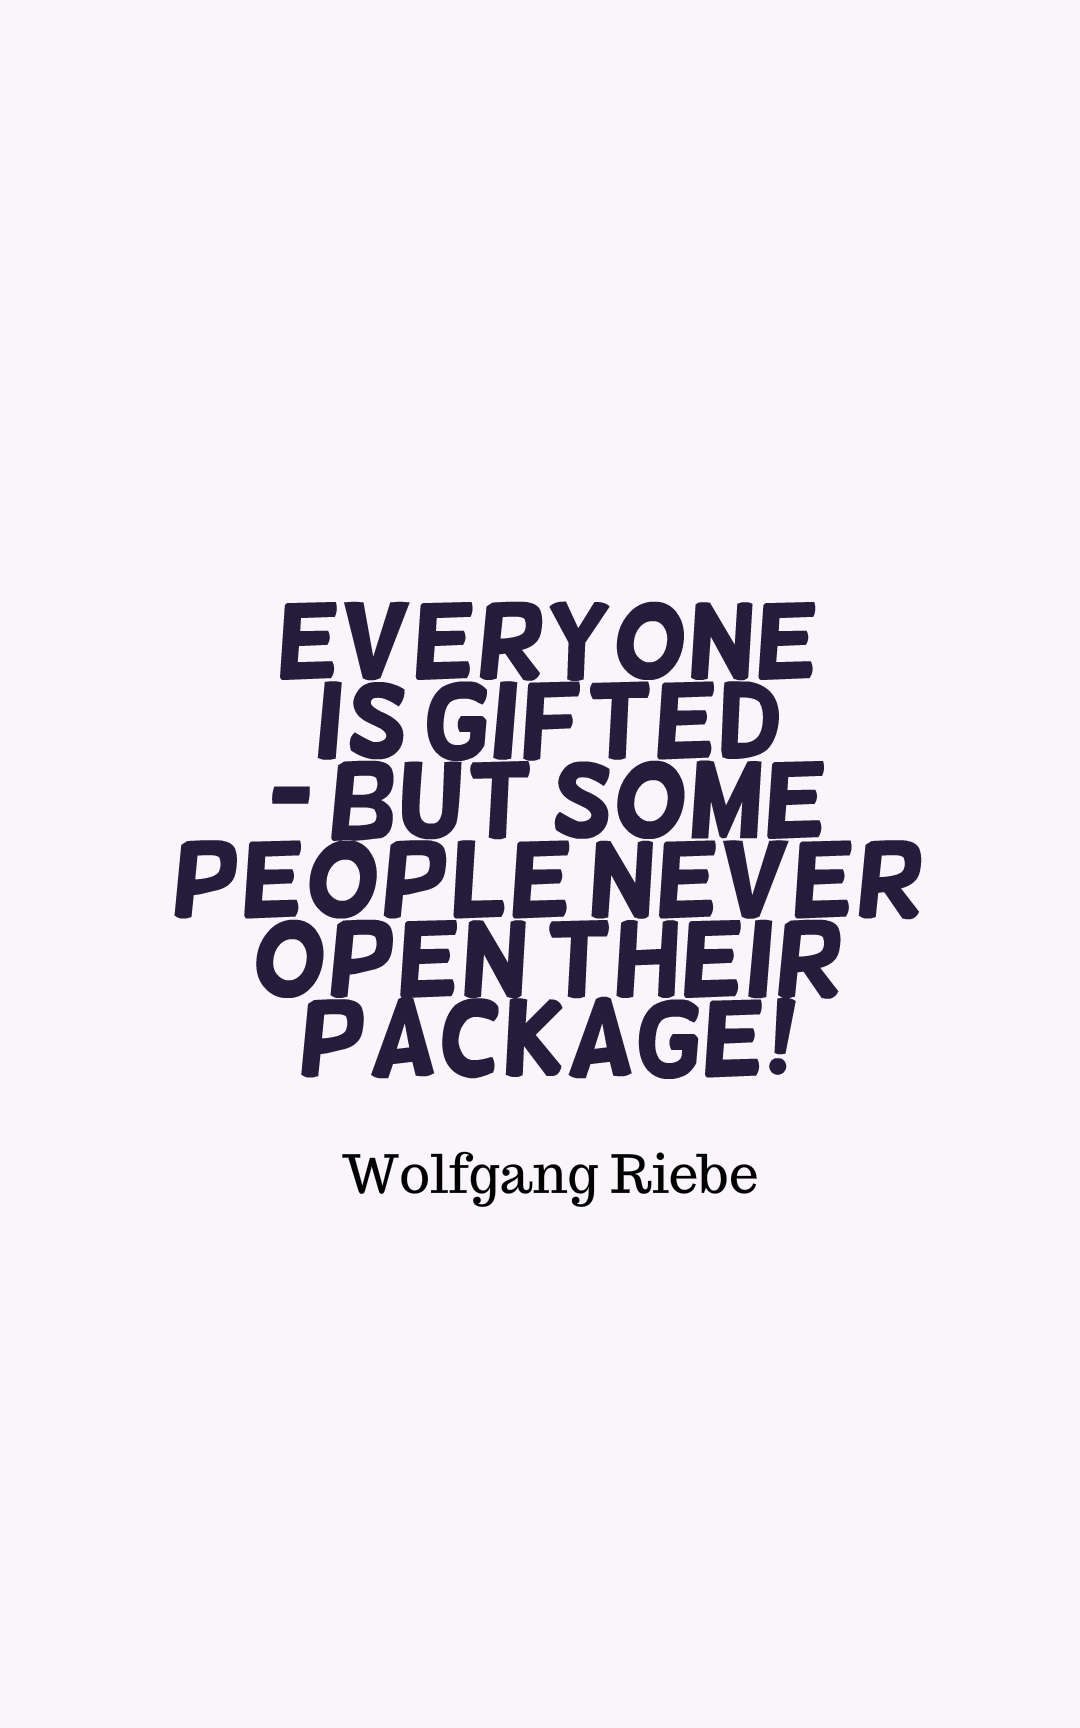 Everyone is gifted - but some people never open their package!